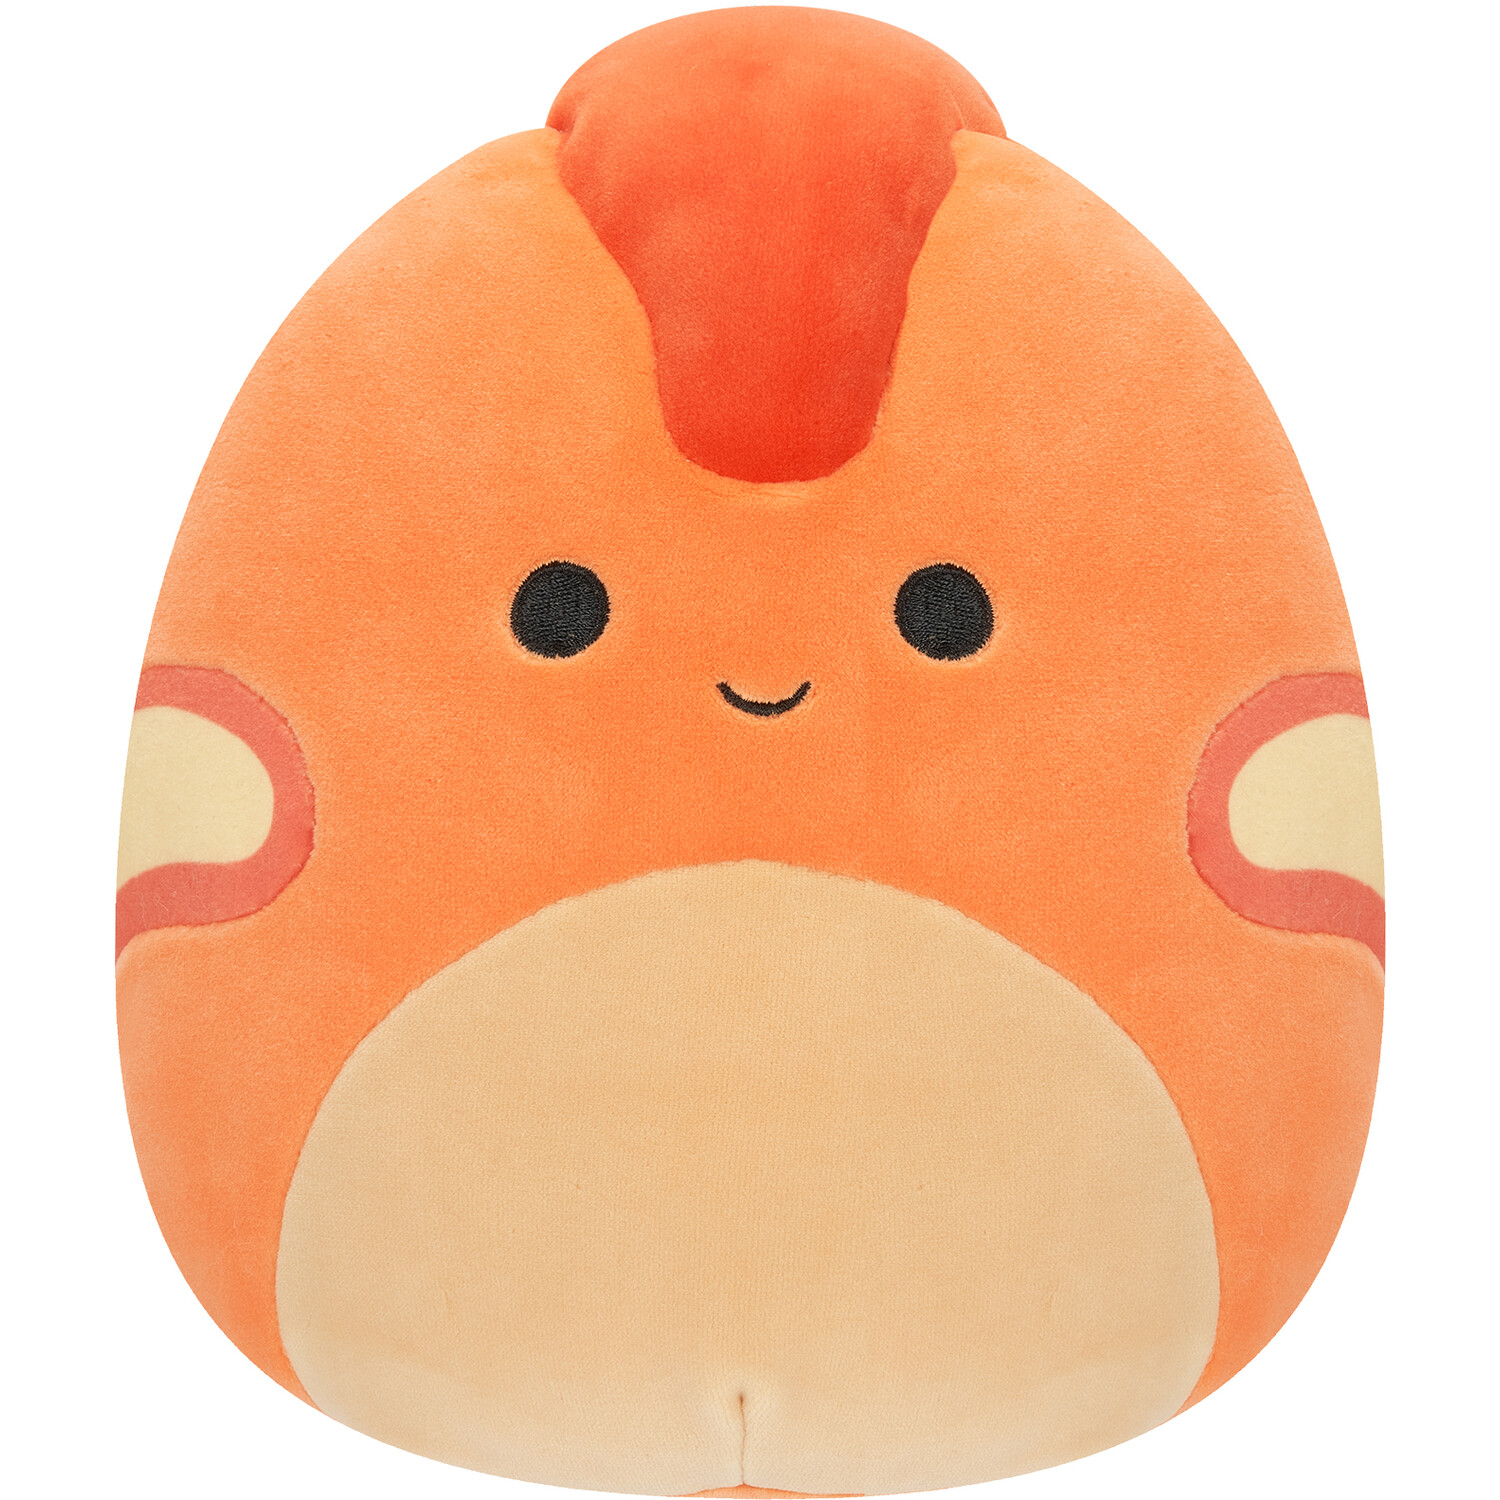 7.5-in Squishmallows Image 5